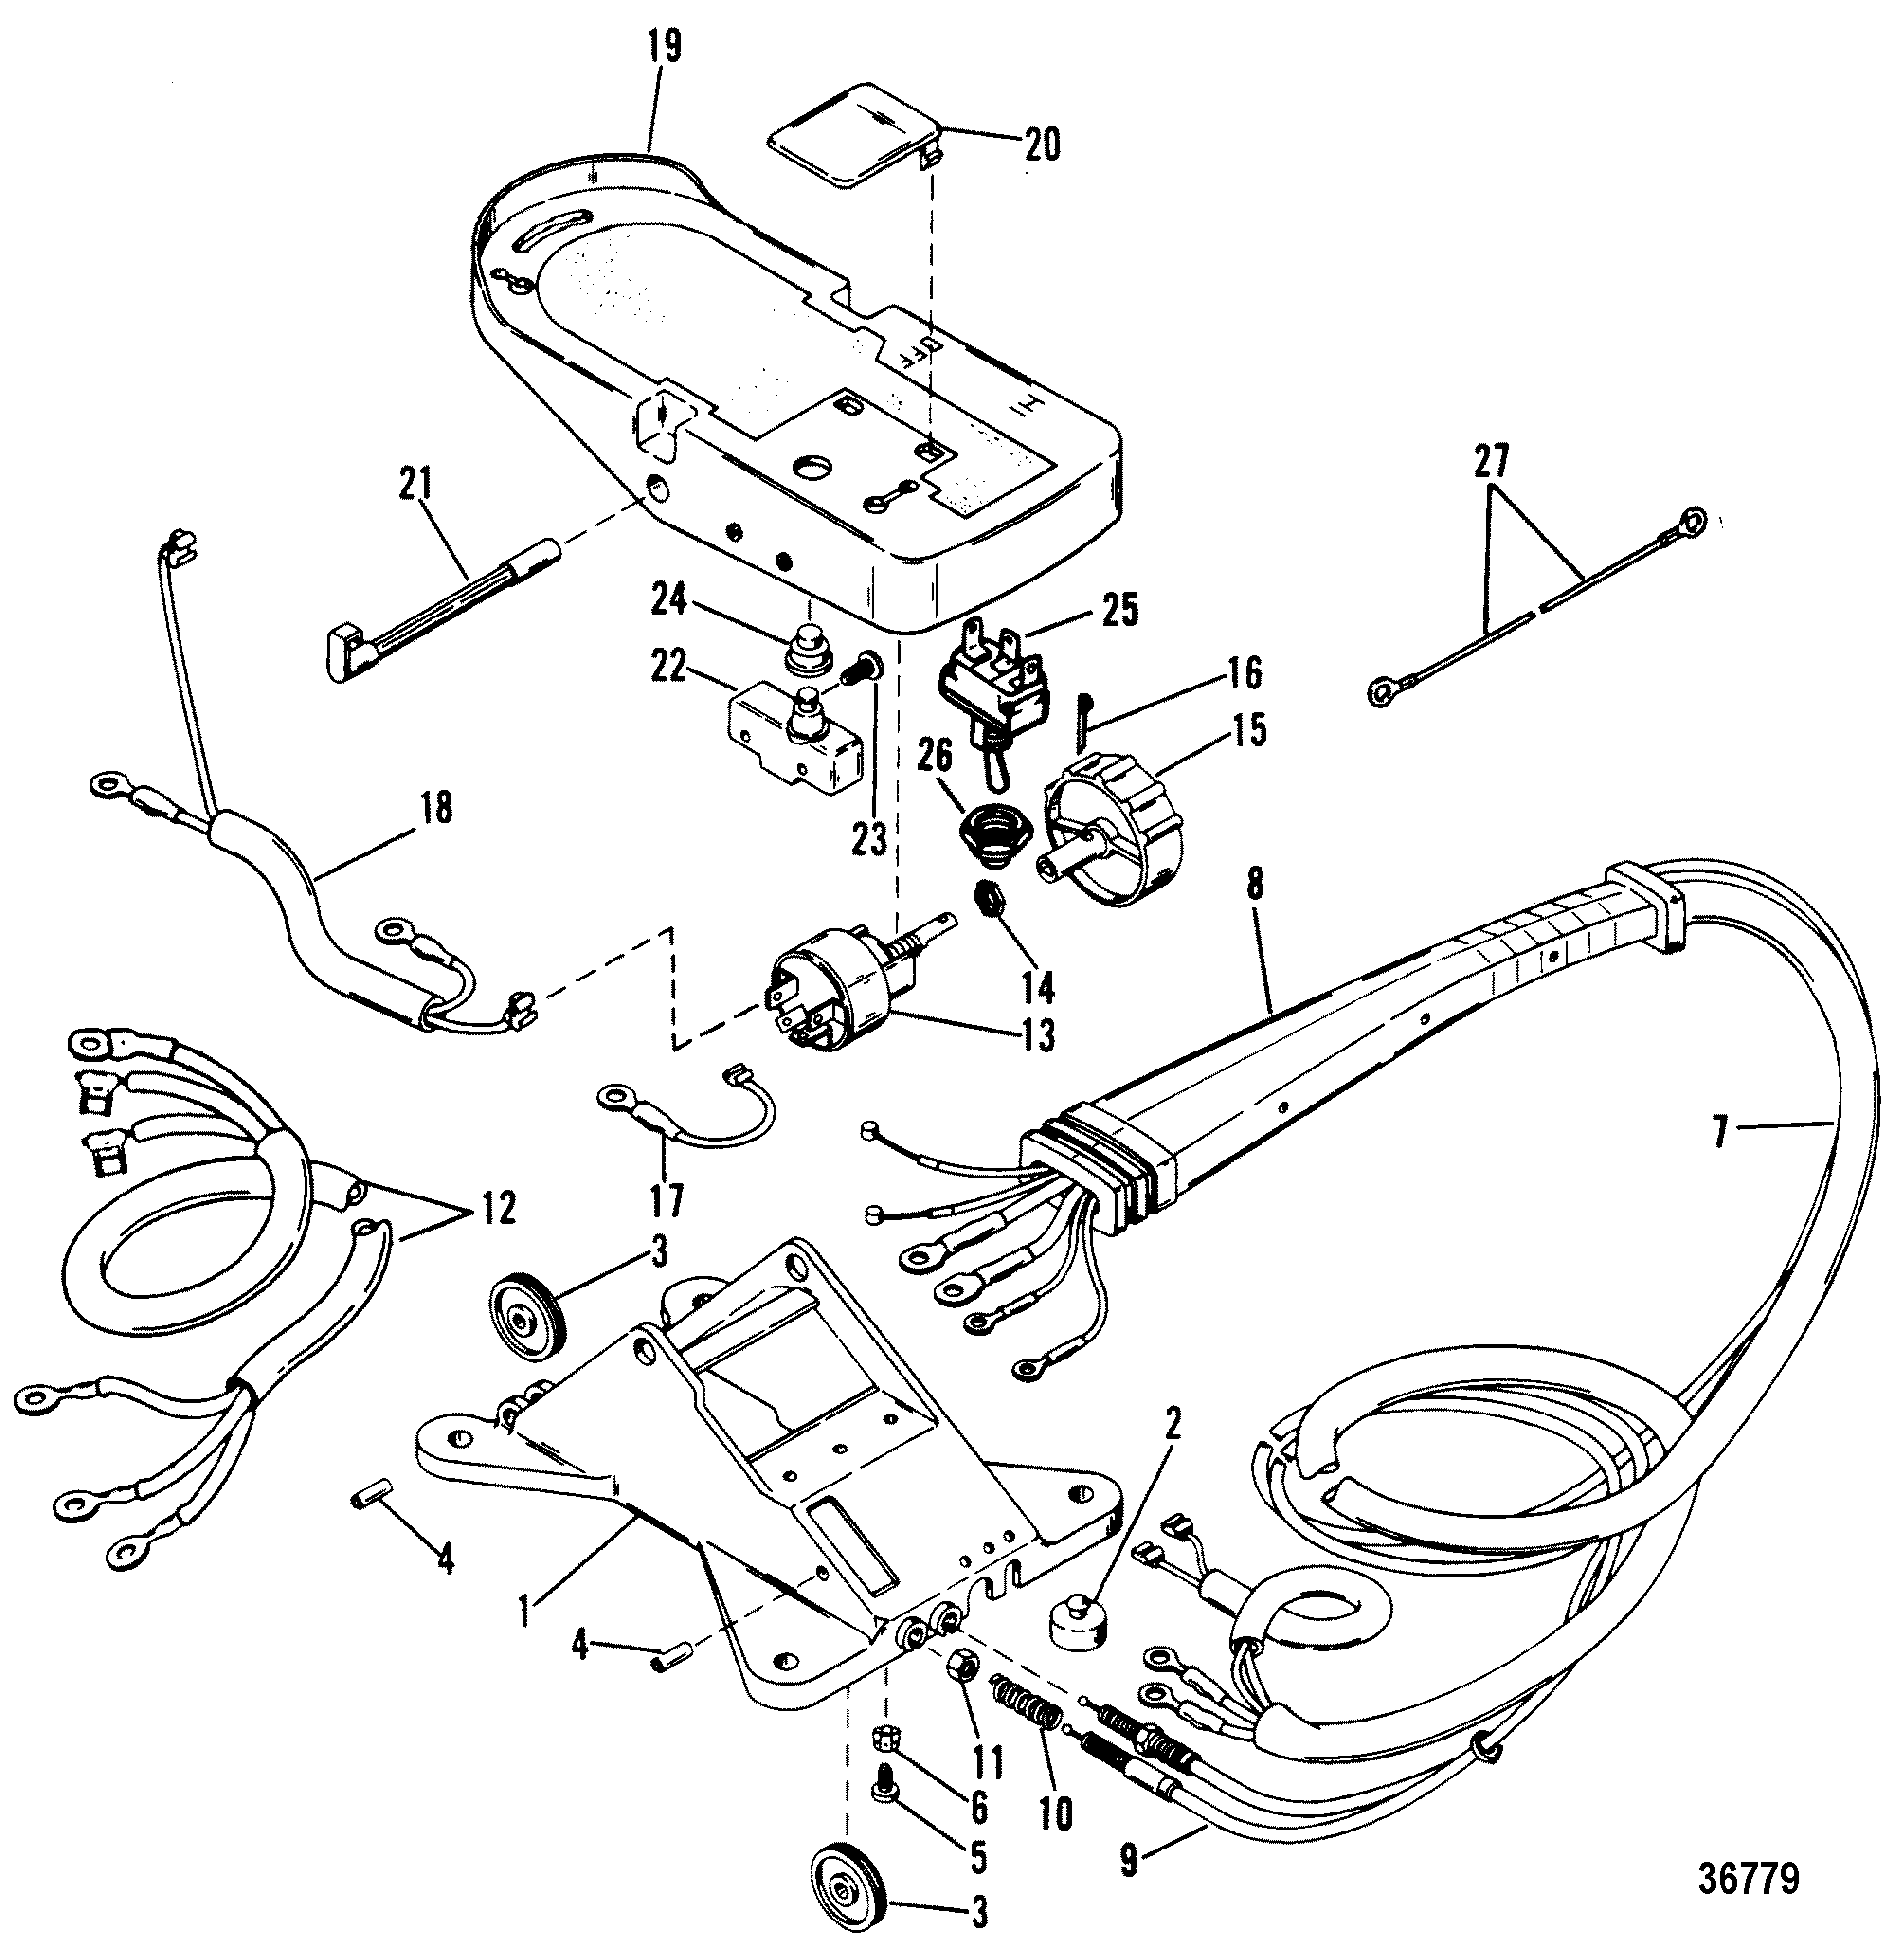 WIRING HARNESS AND FOOT PLATE(Remote Control)